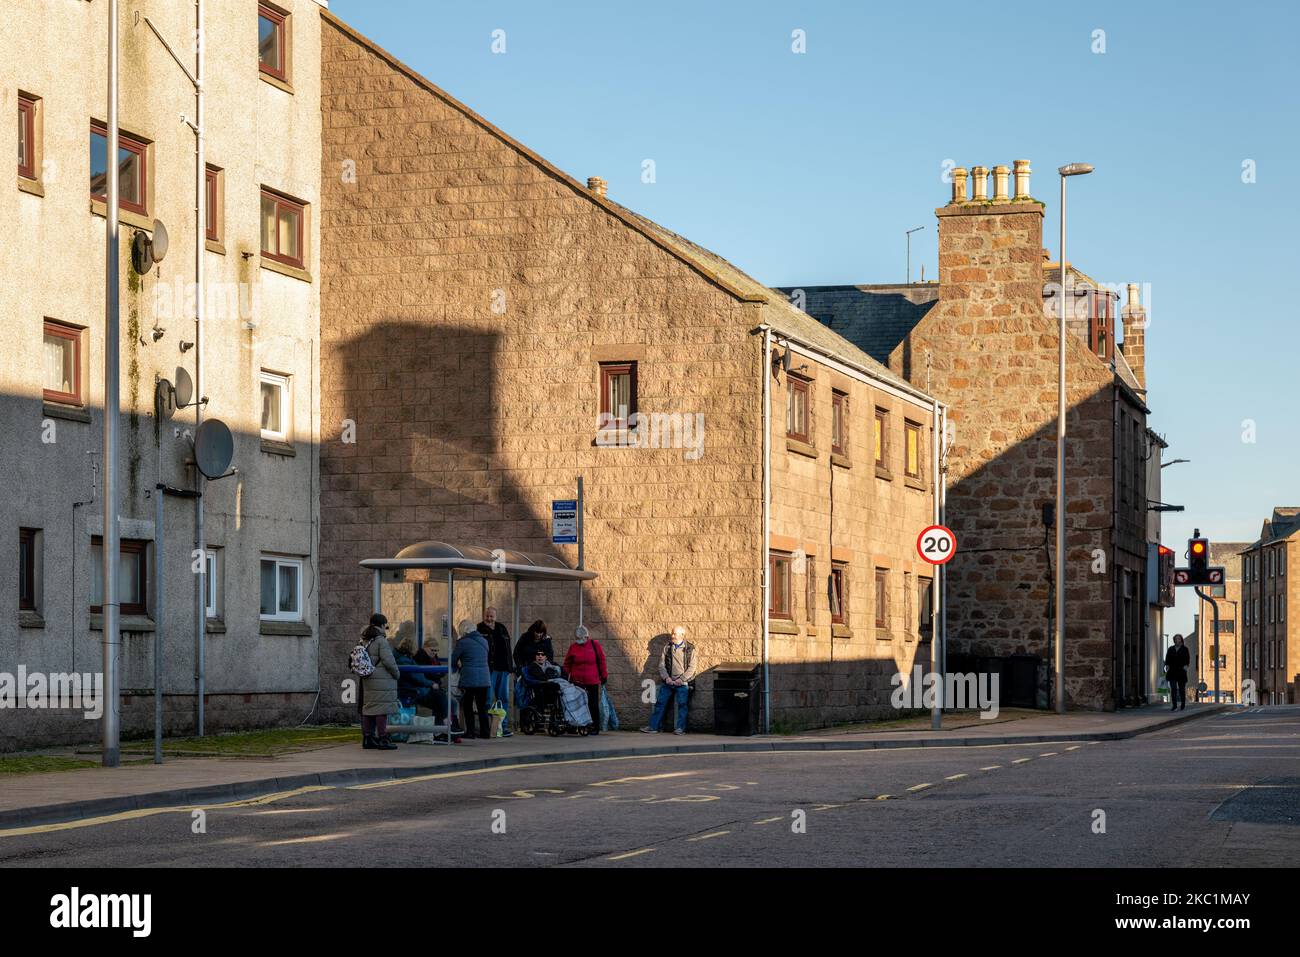 3 November 2022. Peterhead, Aberdeenshire, Scotland. This is people at a Bus Stop in Back Street, Peterhead waiting for the bus to arrive. Only one ma Stock Photo